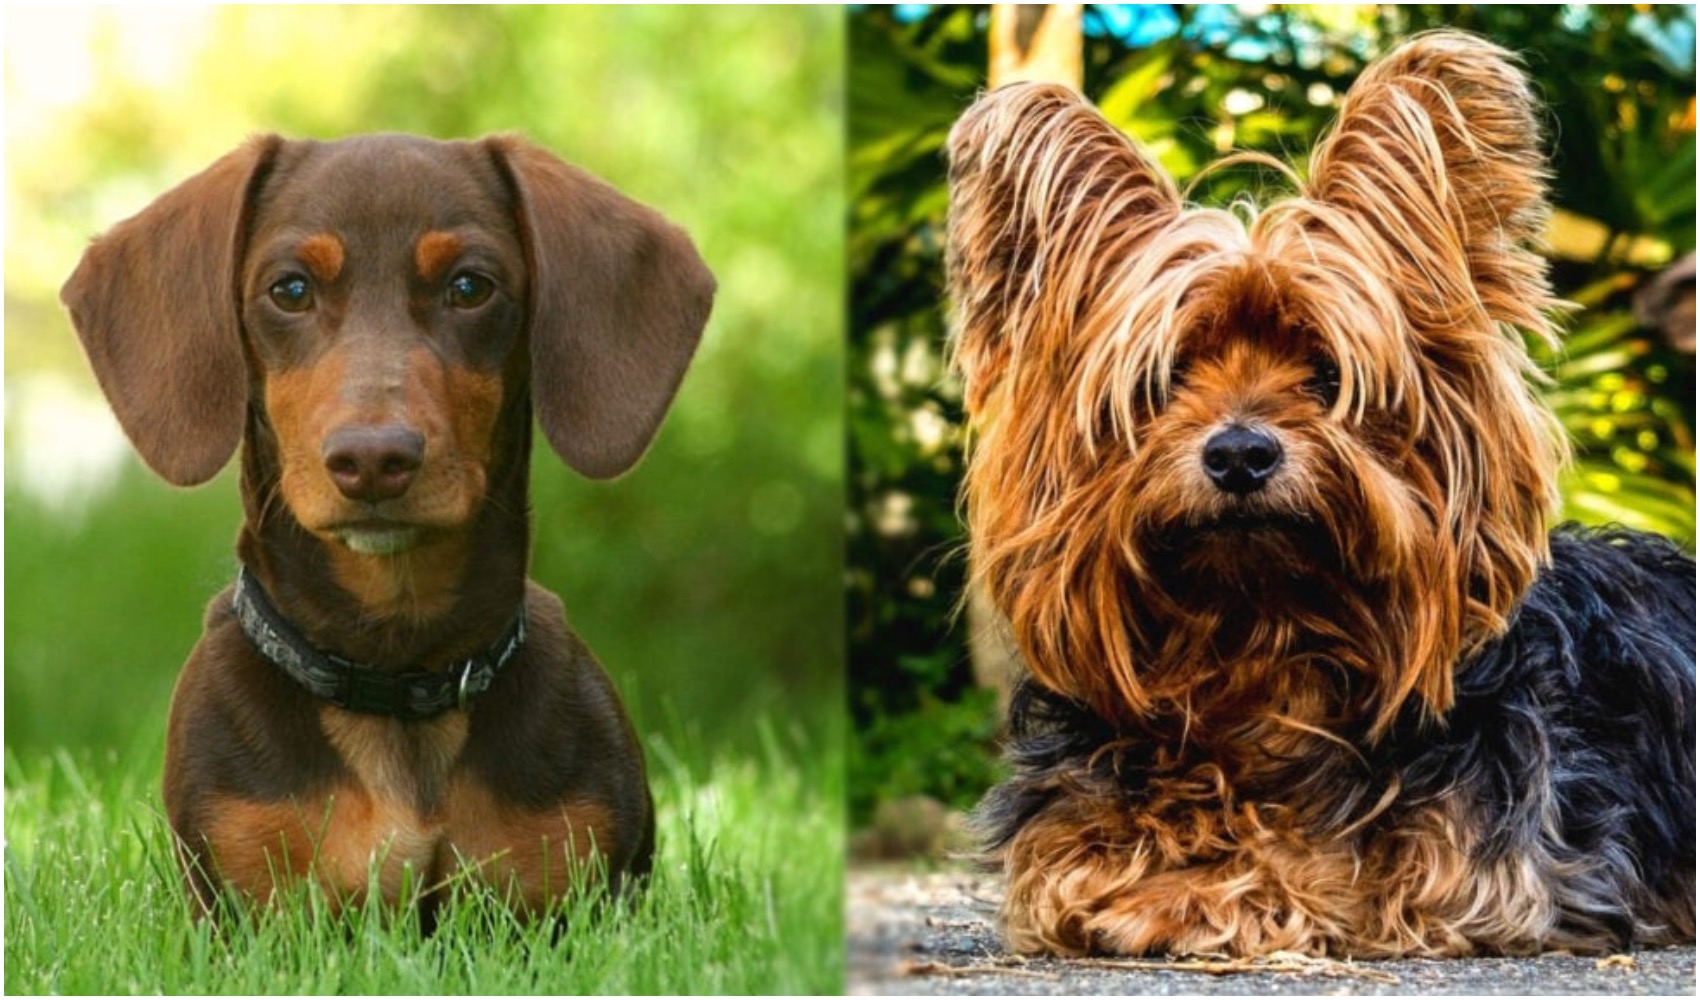 The Dachshund Yorkie Mix is a crossbreed of the Dox and Yorkshire Terrier